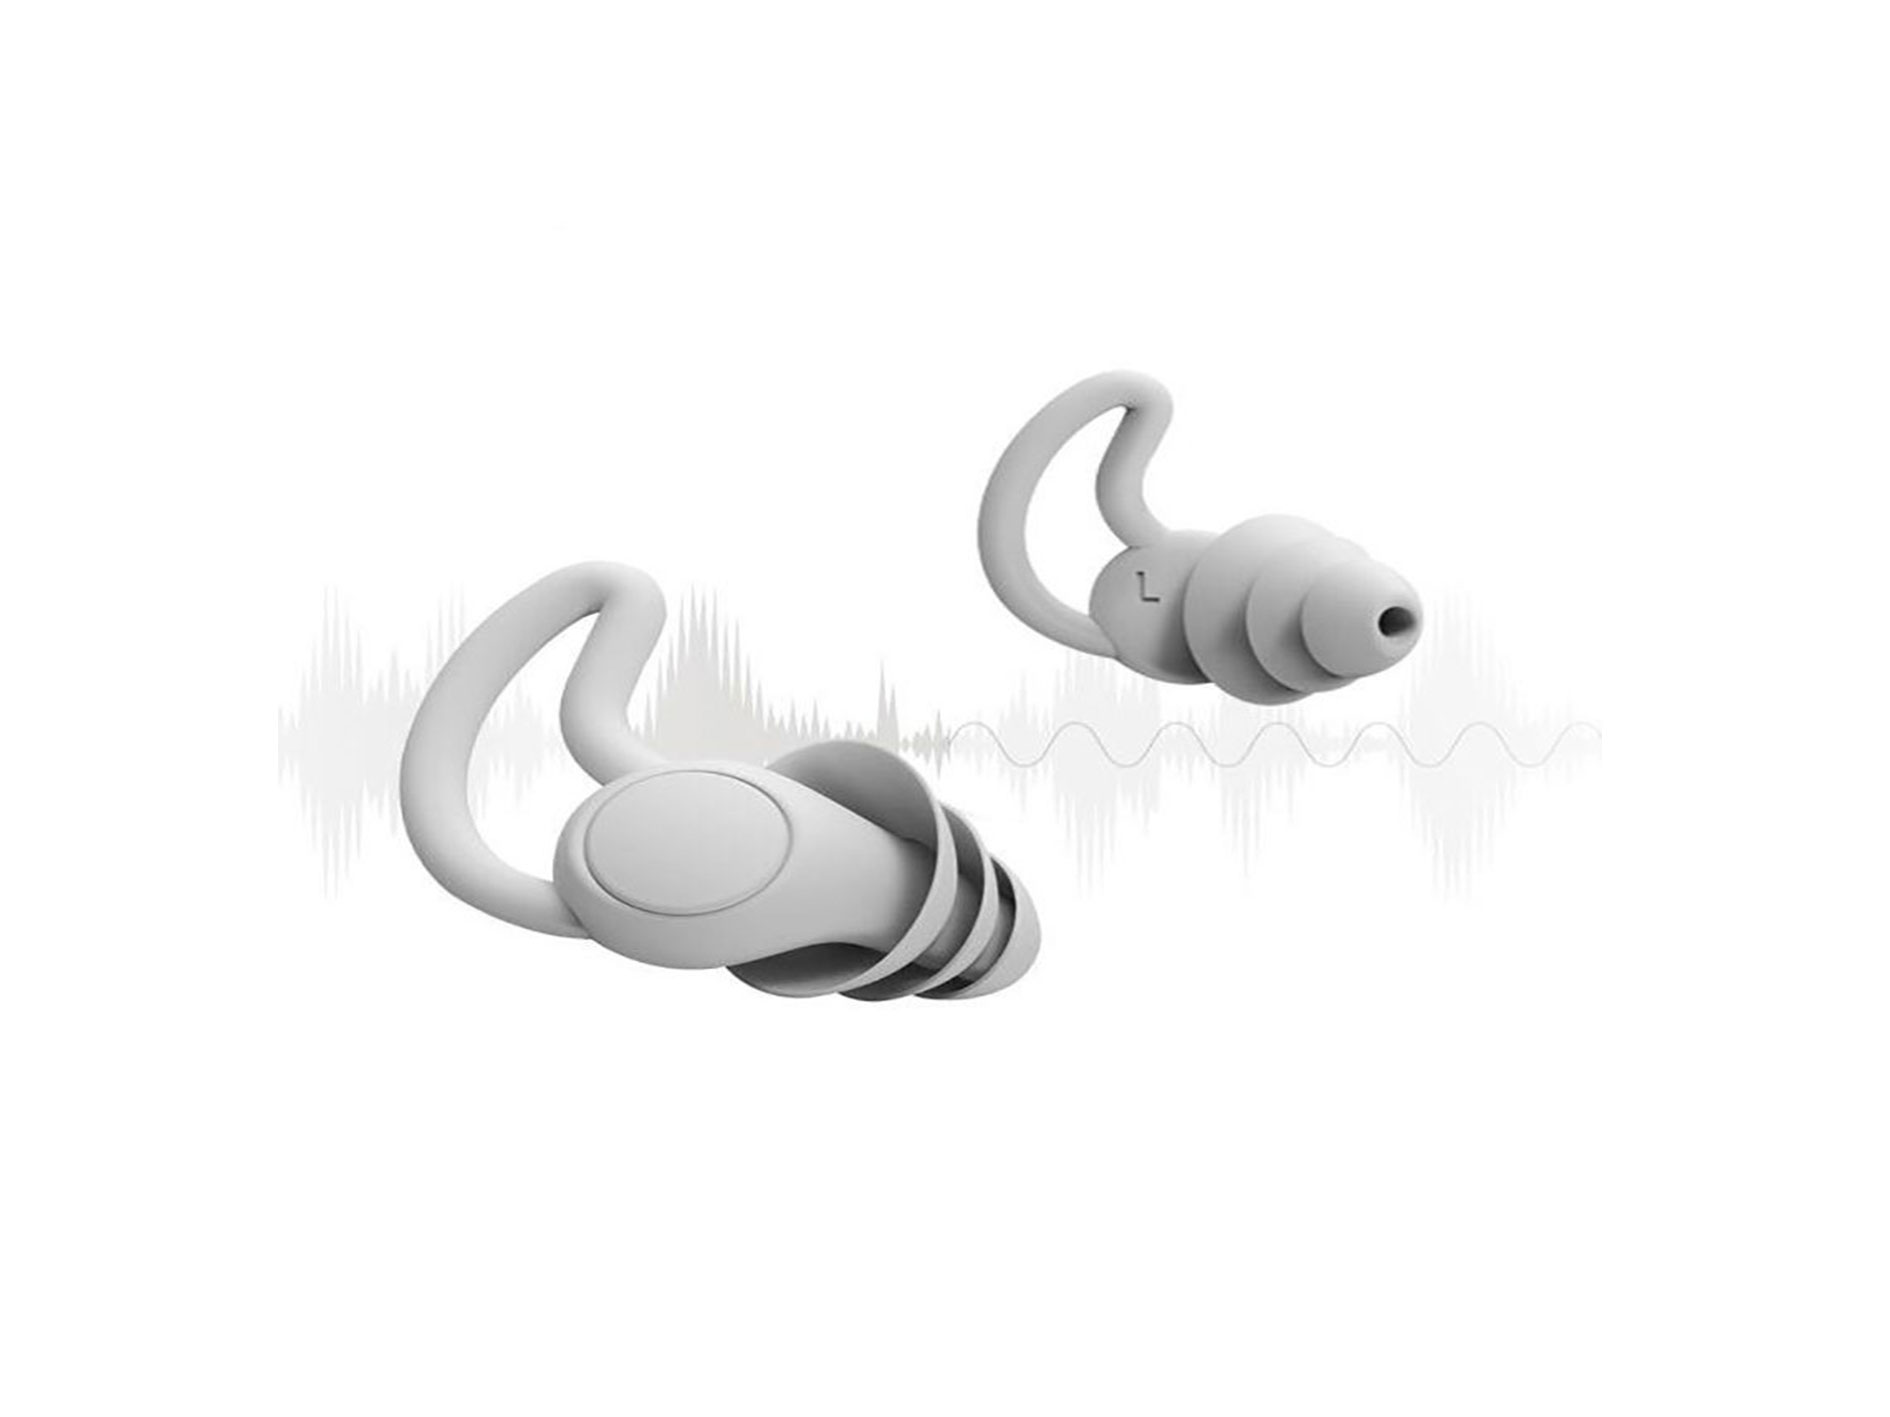 iMeBoBo Anti Noise Earplug Super Sound Insulation 40 Decibels Secure and Fit For Sleeping